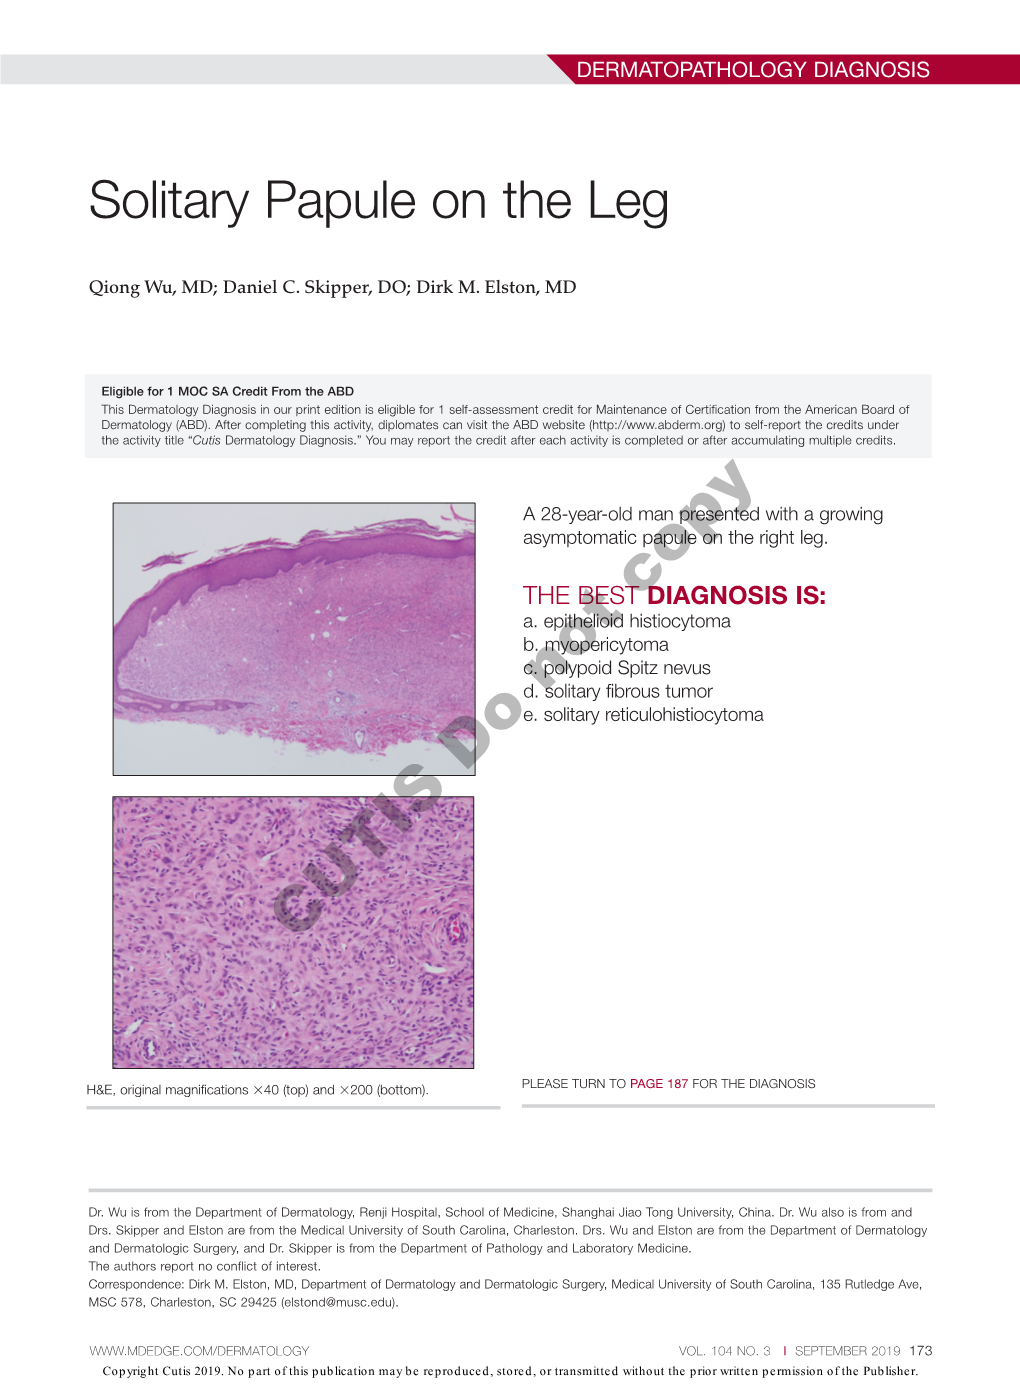 Solitary Papule on the Leg